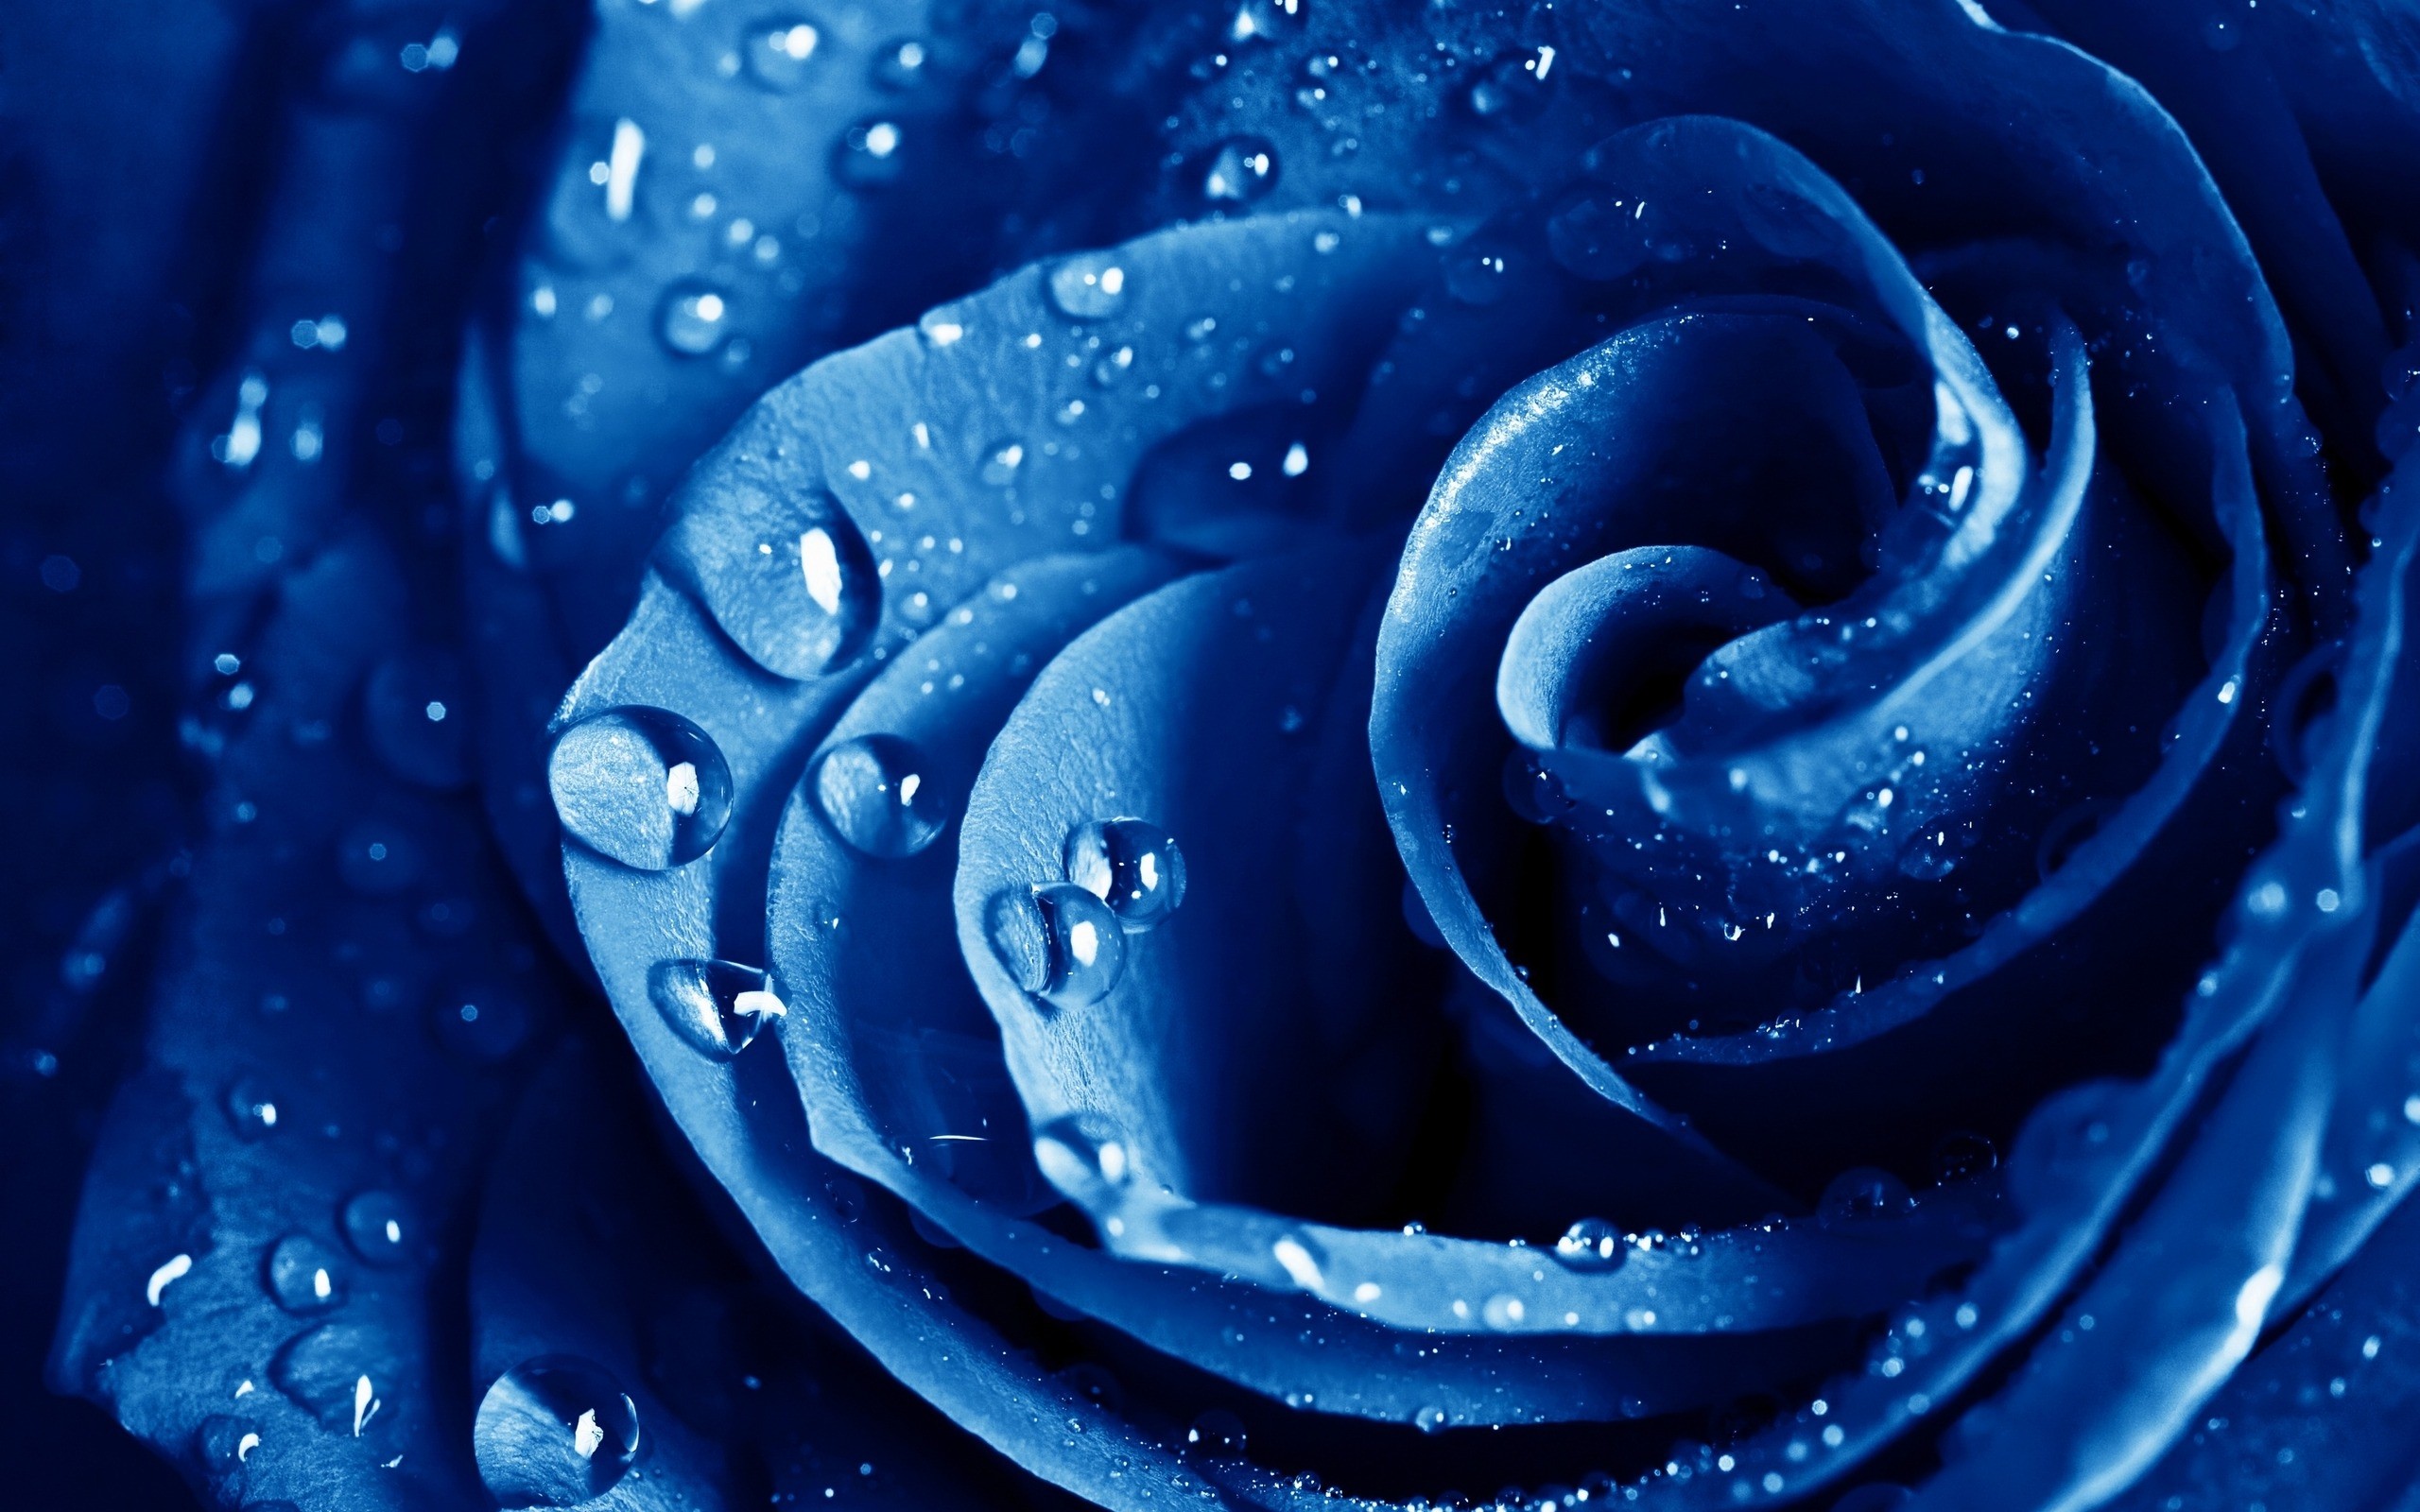  2015 By Stephen Comments Off on Blue Water Drops Wallpapers 2560x1600